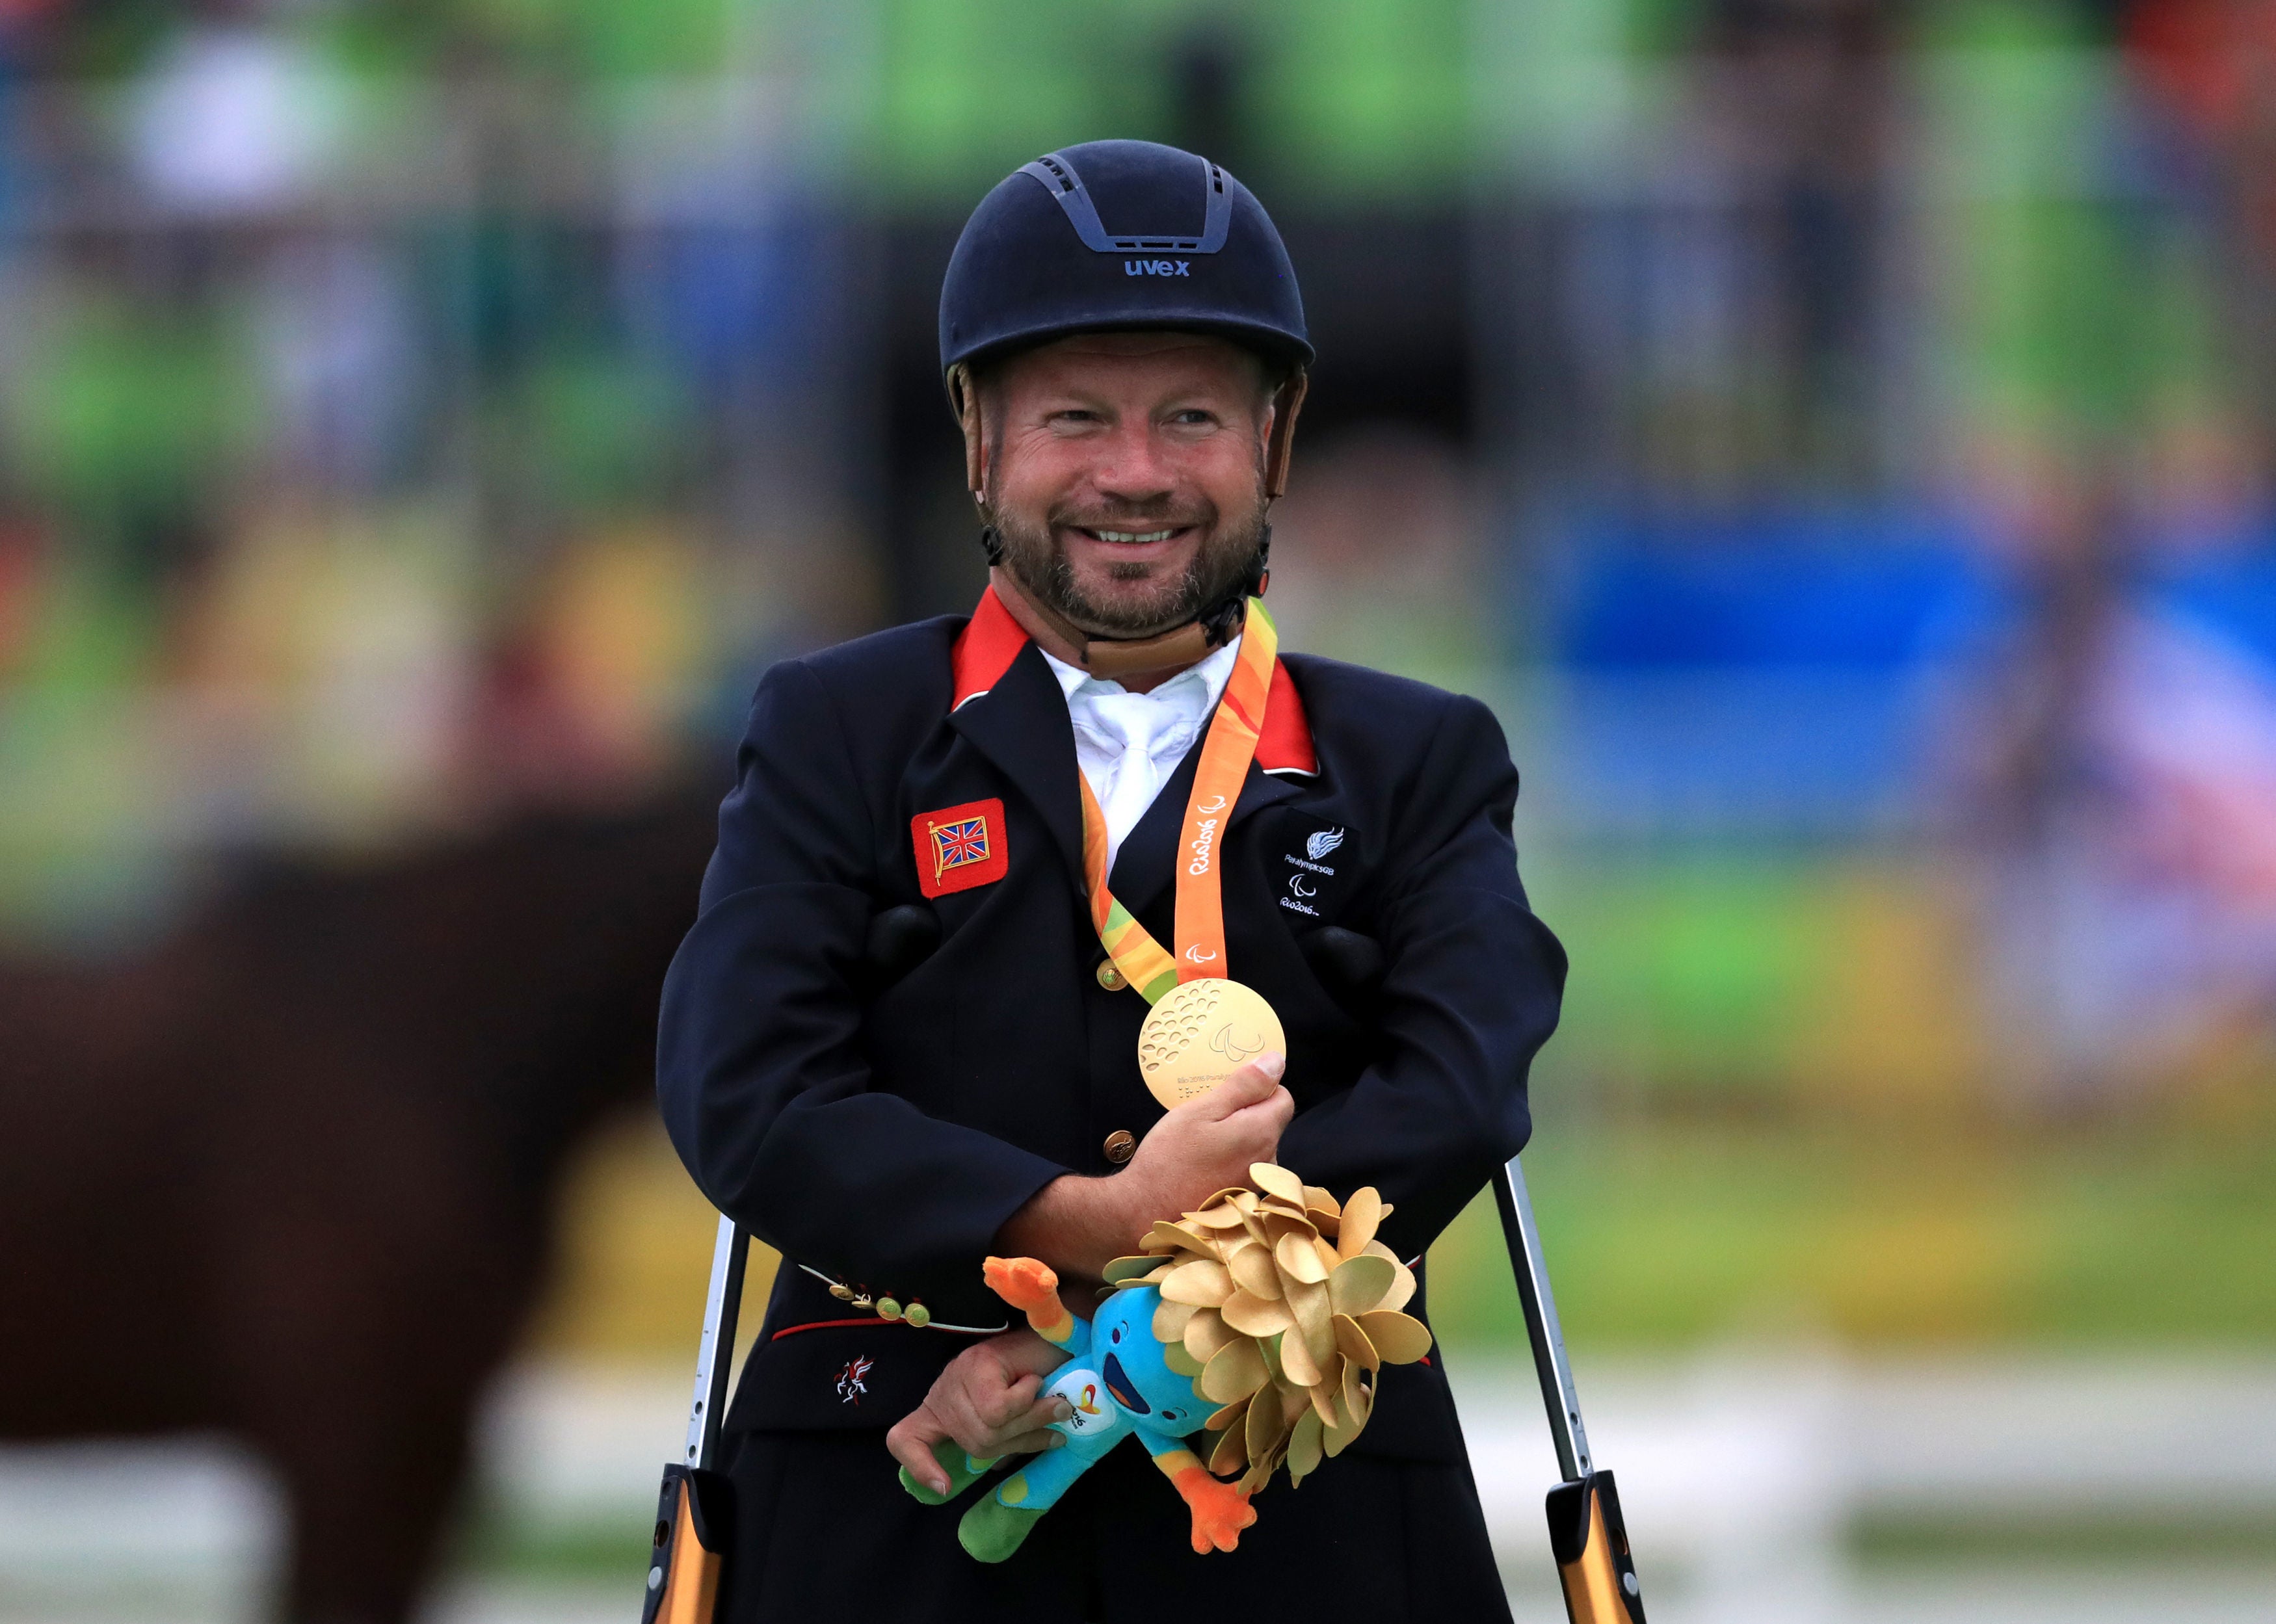 Lee Pearson has won 11 Paralympic golds